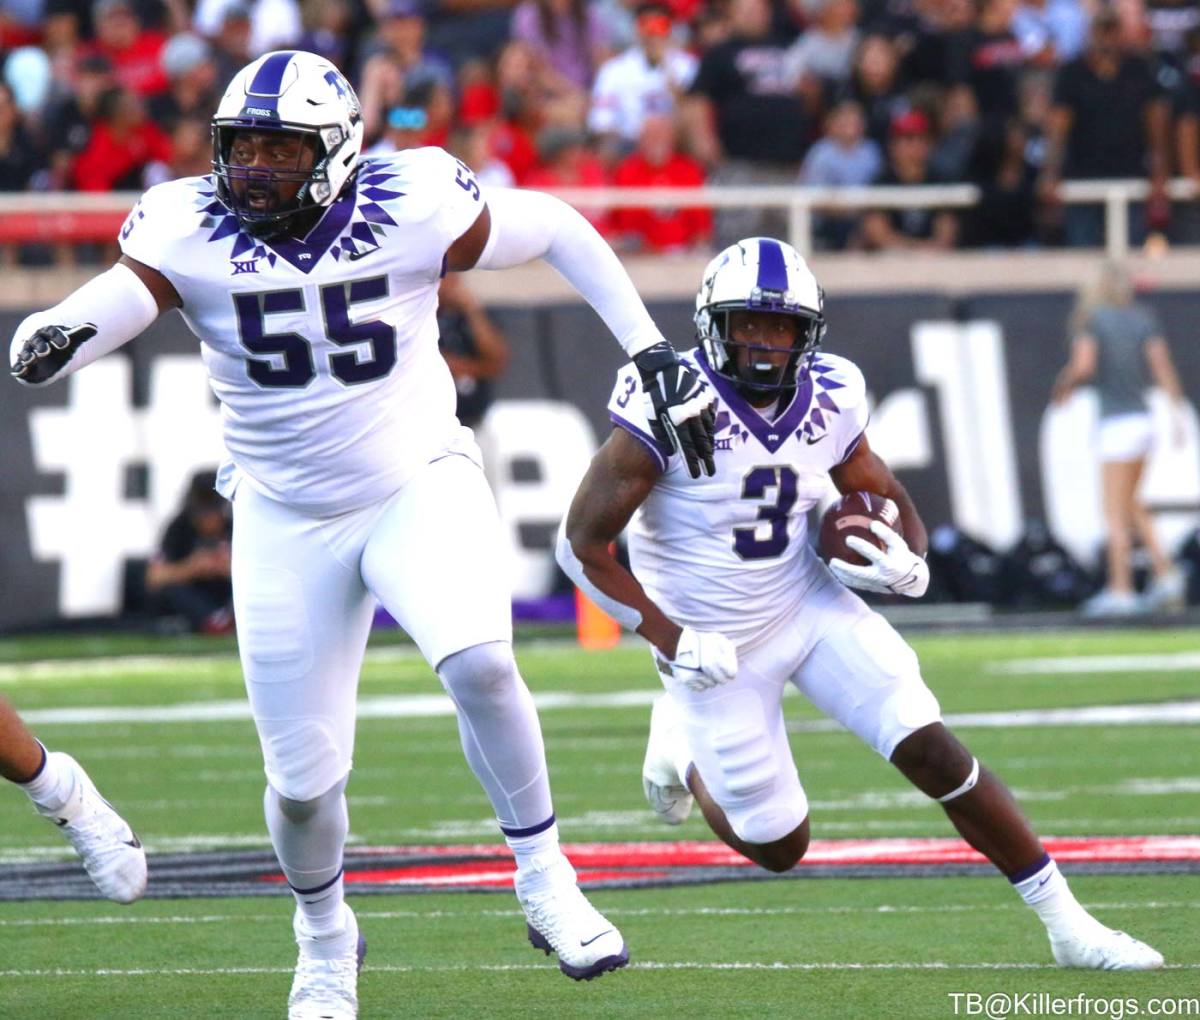 TCU Horned Frogs Emari Demercado carries the ball during the game against Texas Tech on October 9, 2021.